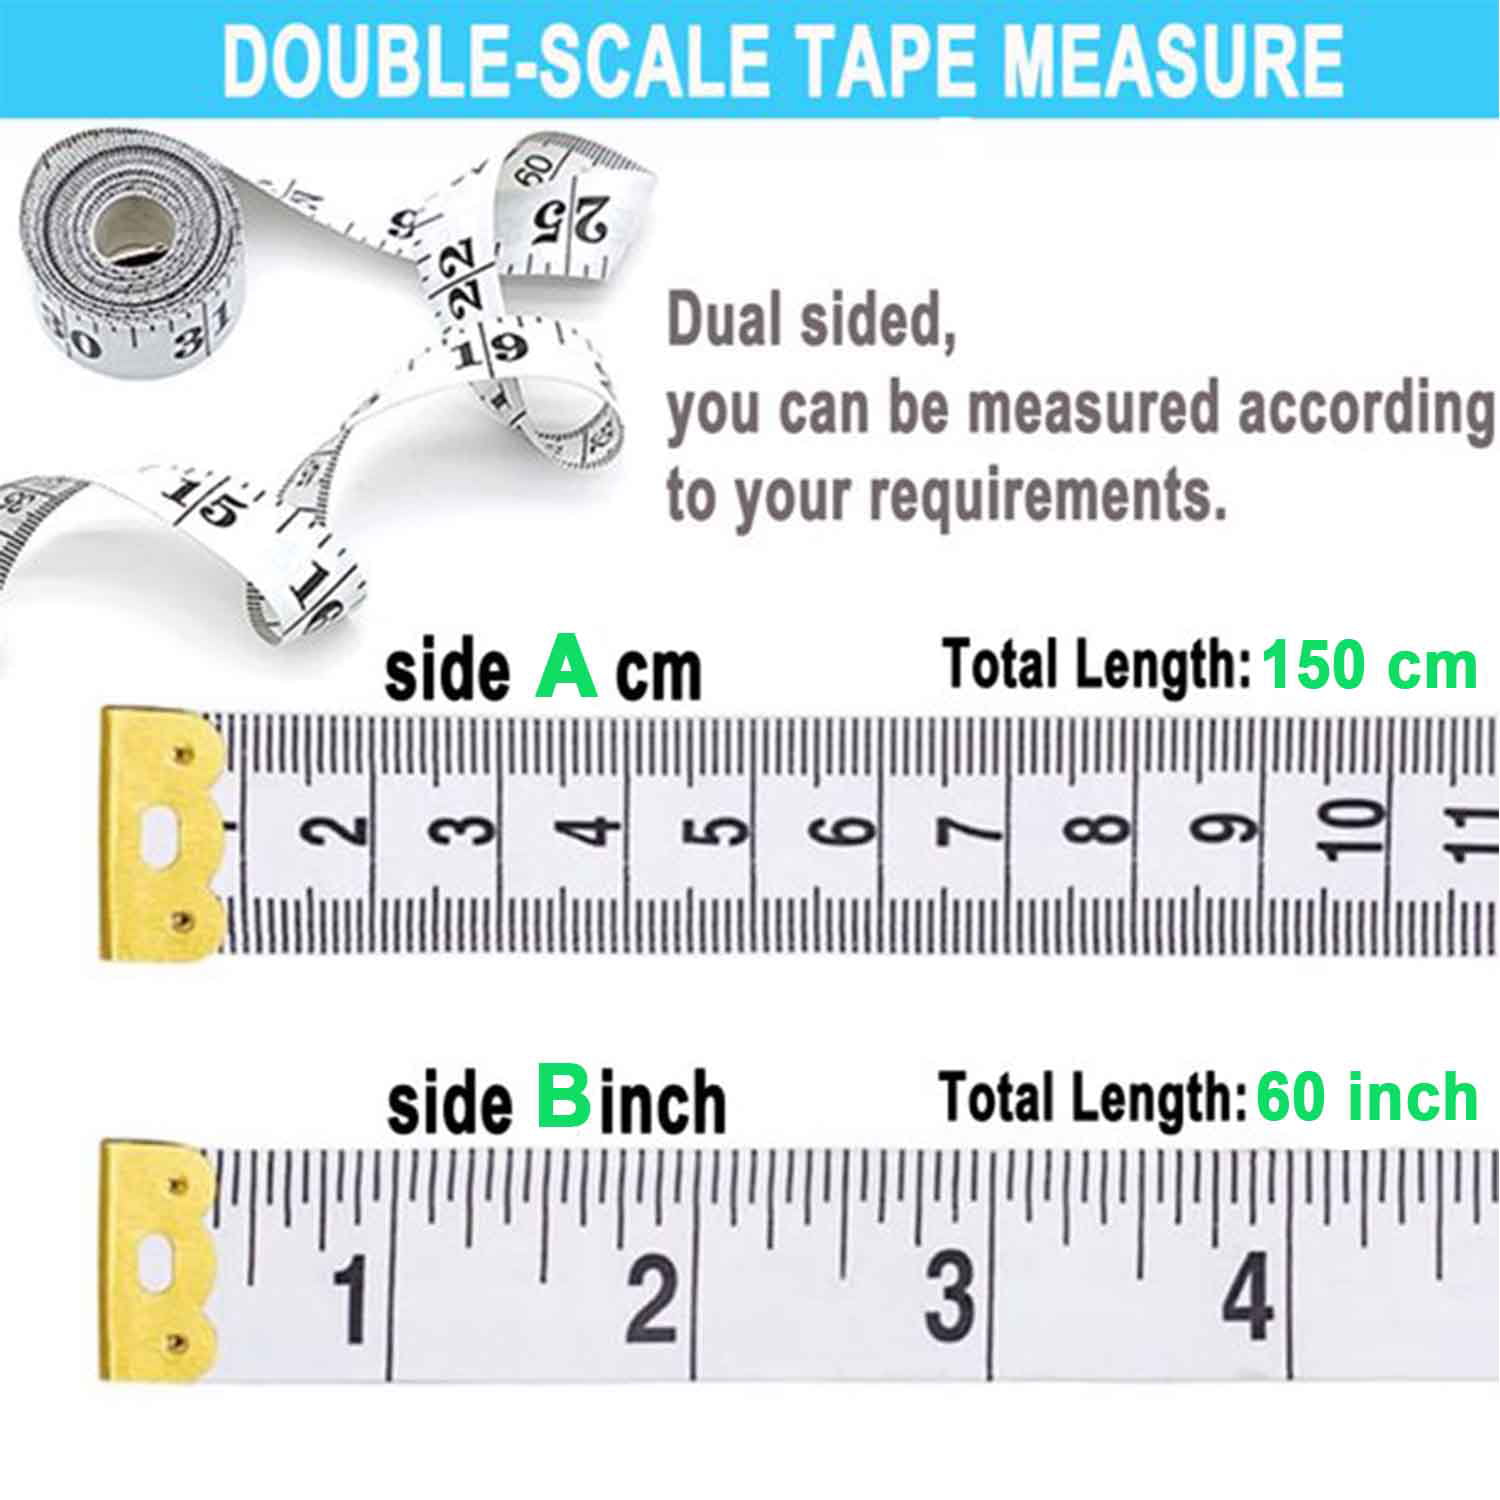 Soft Measuring Tape for Body, 60Inch (150cm) - Retractable Measuring for  Accurate Way to Track Weight Loss Muscle Gain by One Hand, Multiple Colors  Available